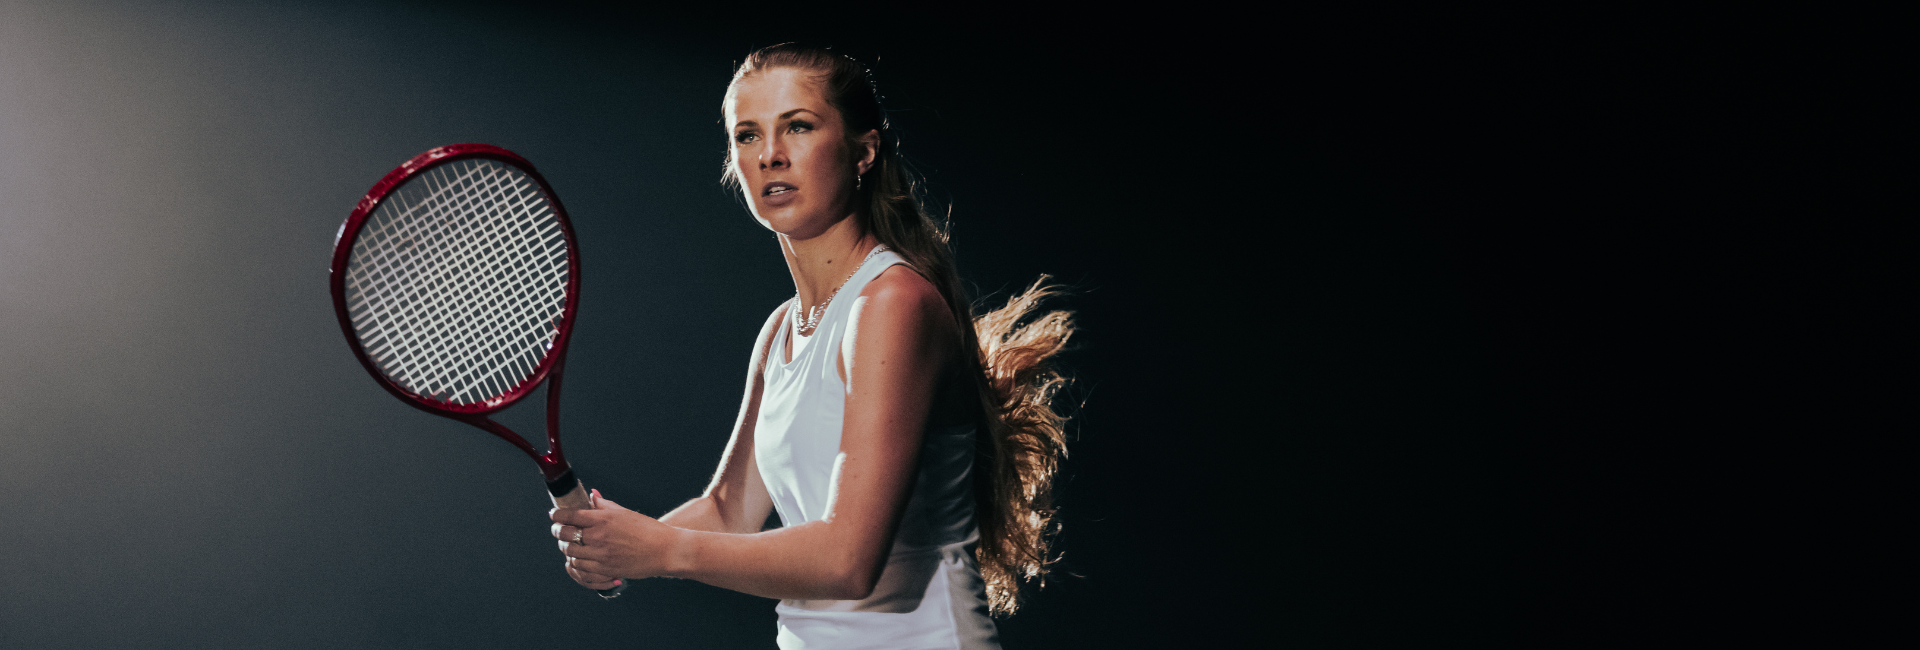 Courtney Webeck, a low-vision tennis champion, holds a tennis racquet in front of a black background.